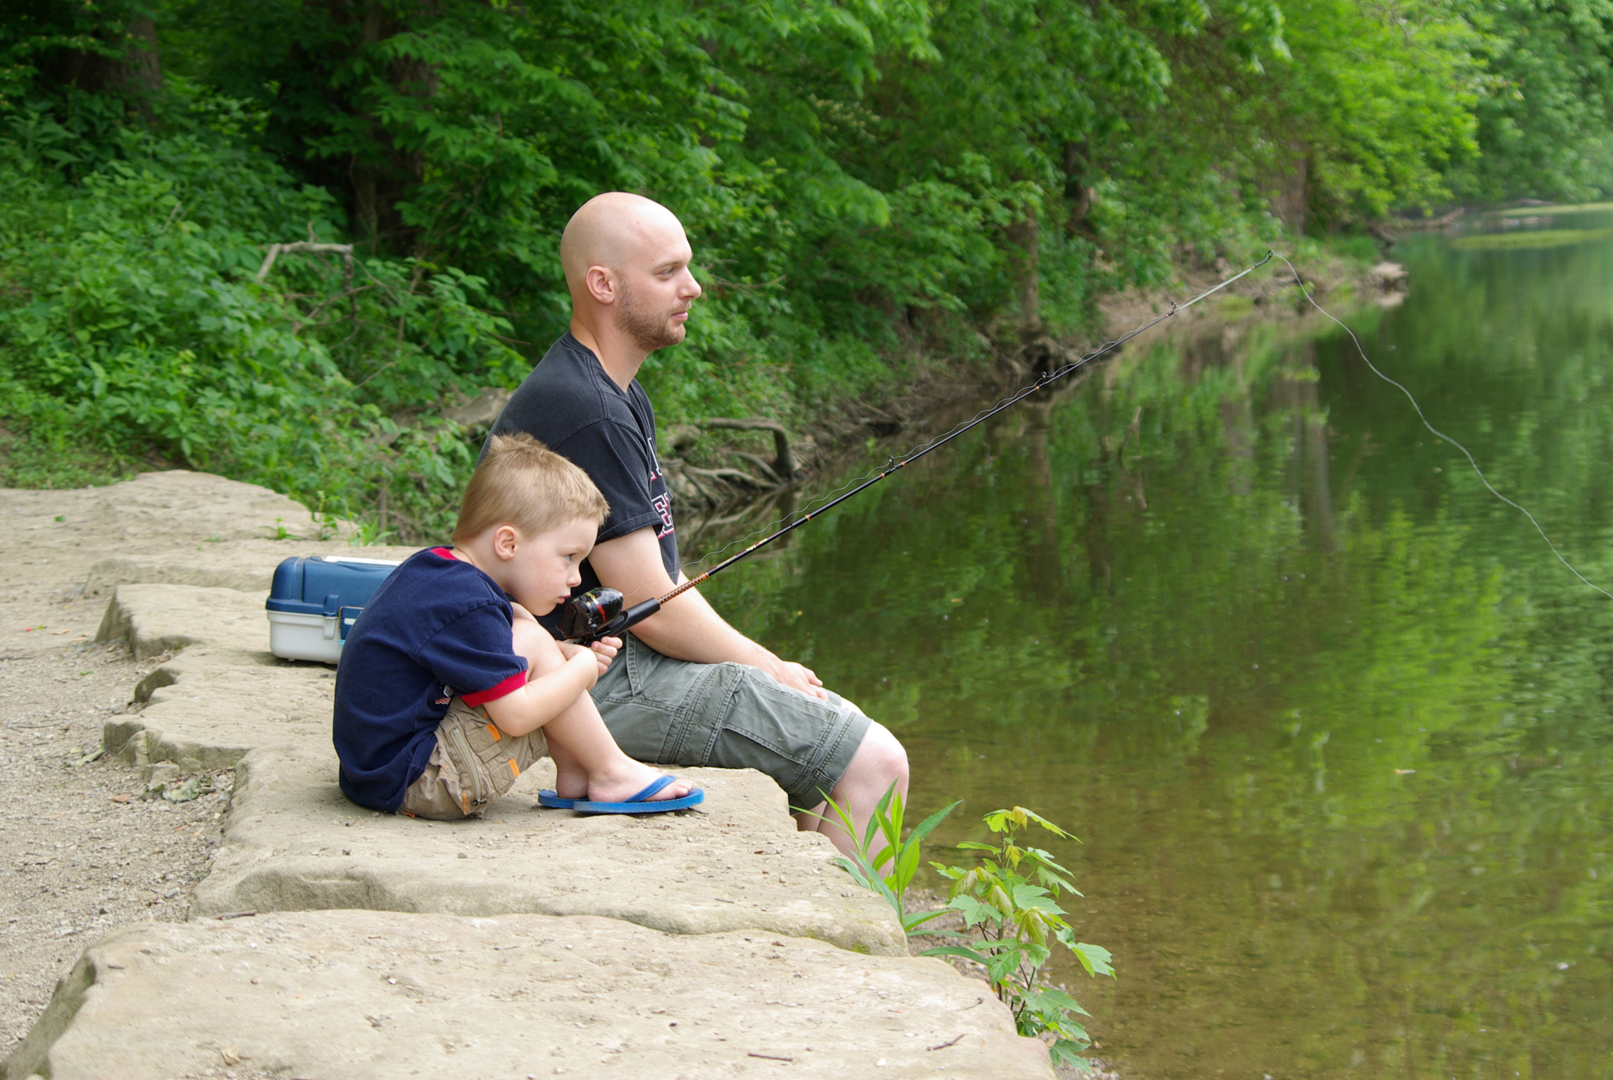 Father and son fishing on Big Darby Creek at Battelle Darby Creek.